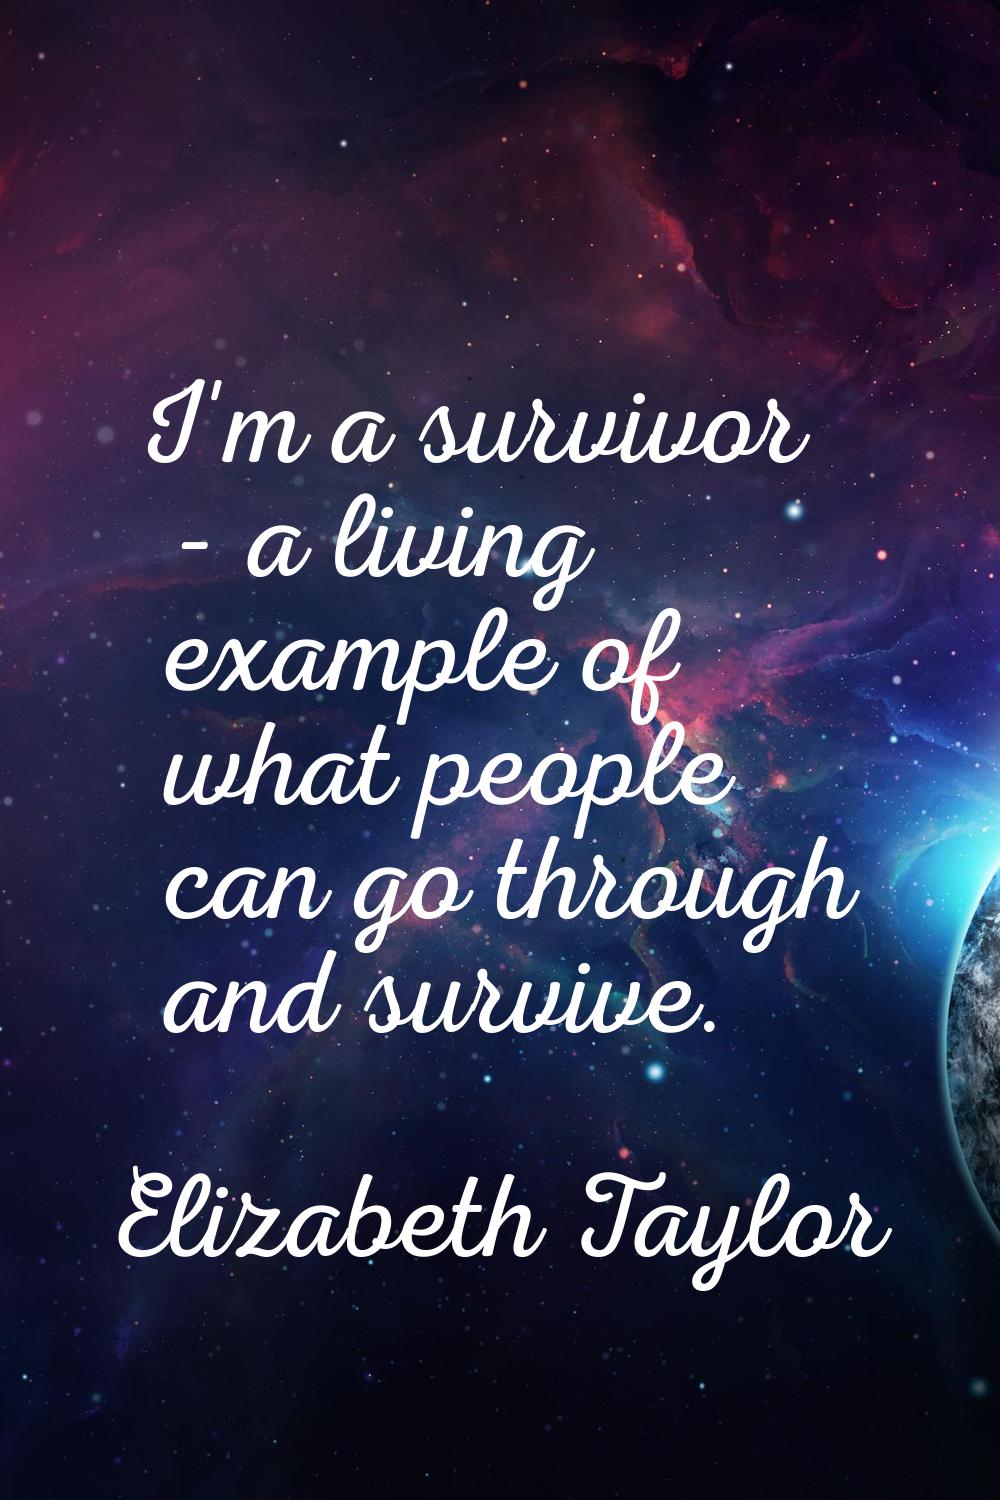 I'm a survivor - a living example of what people can go through and survive.